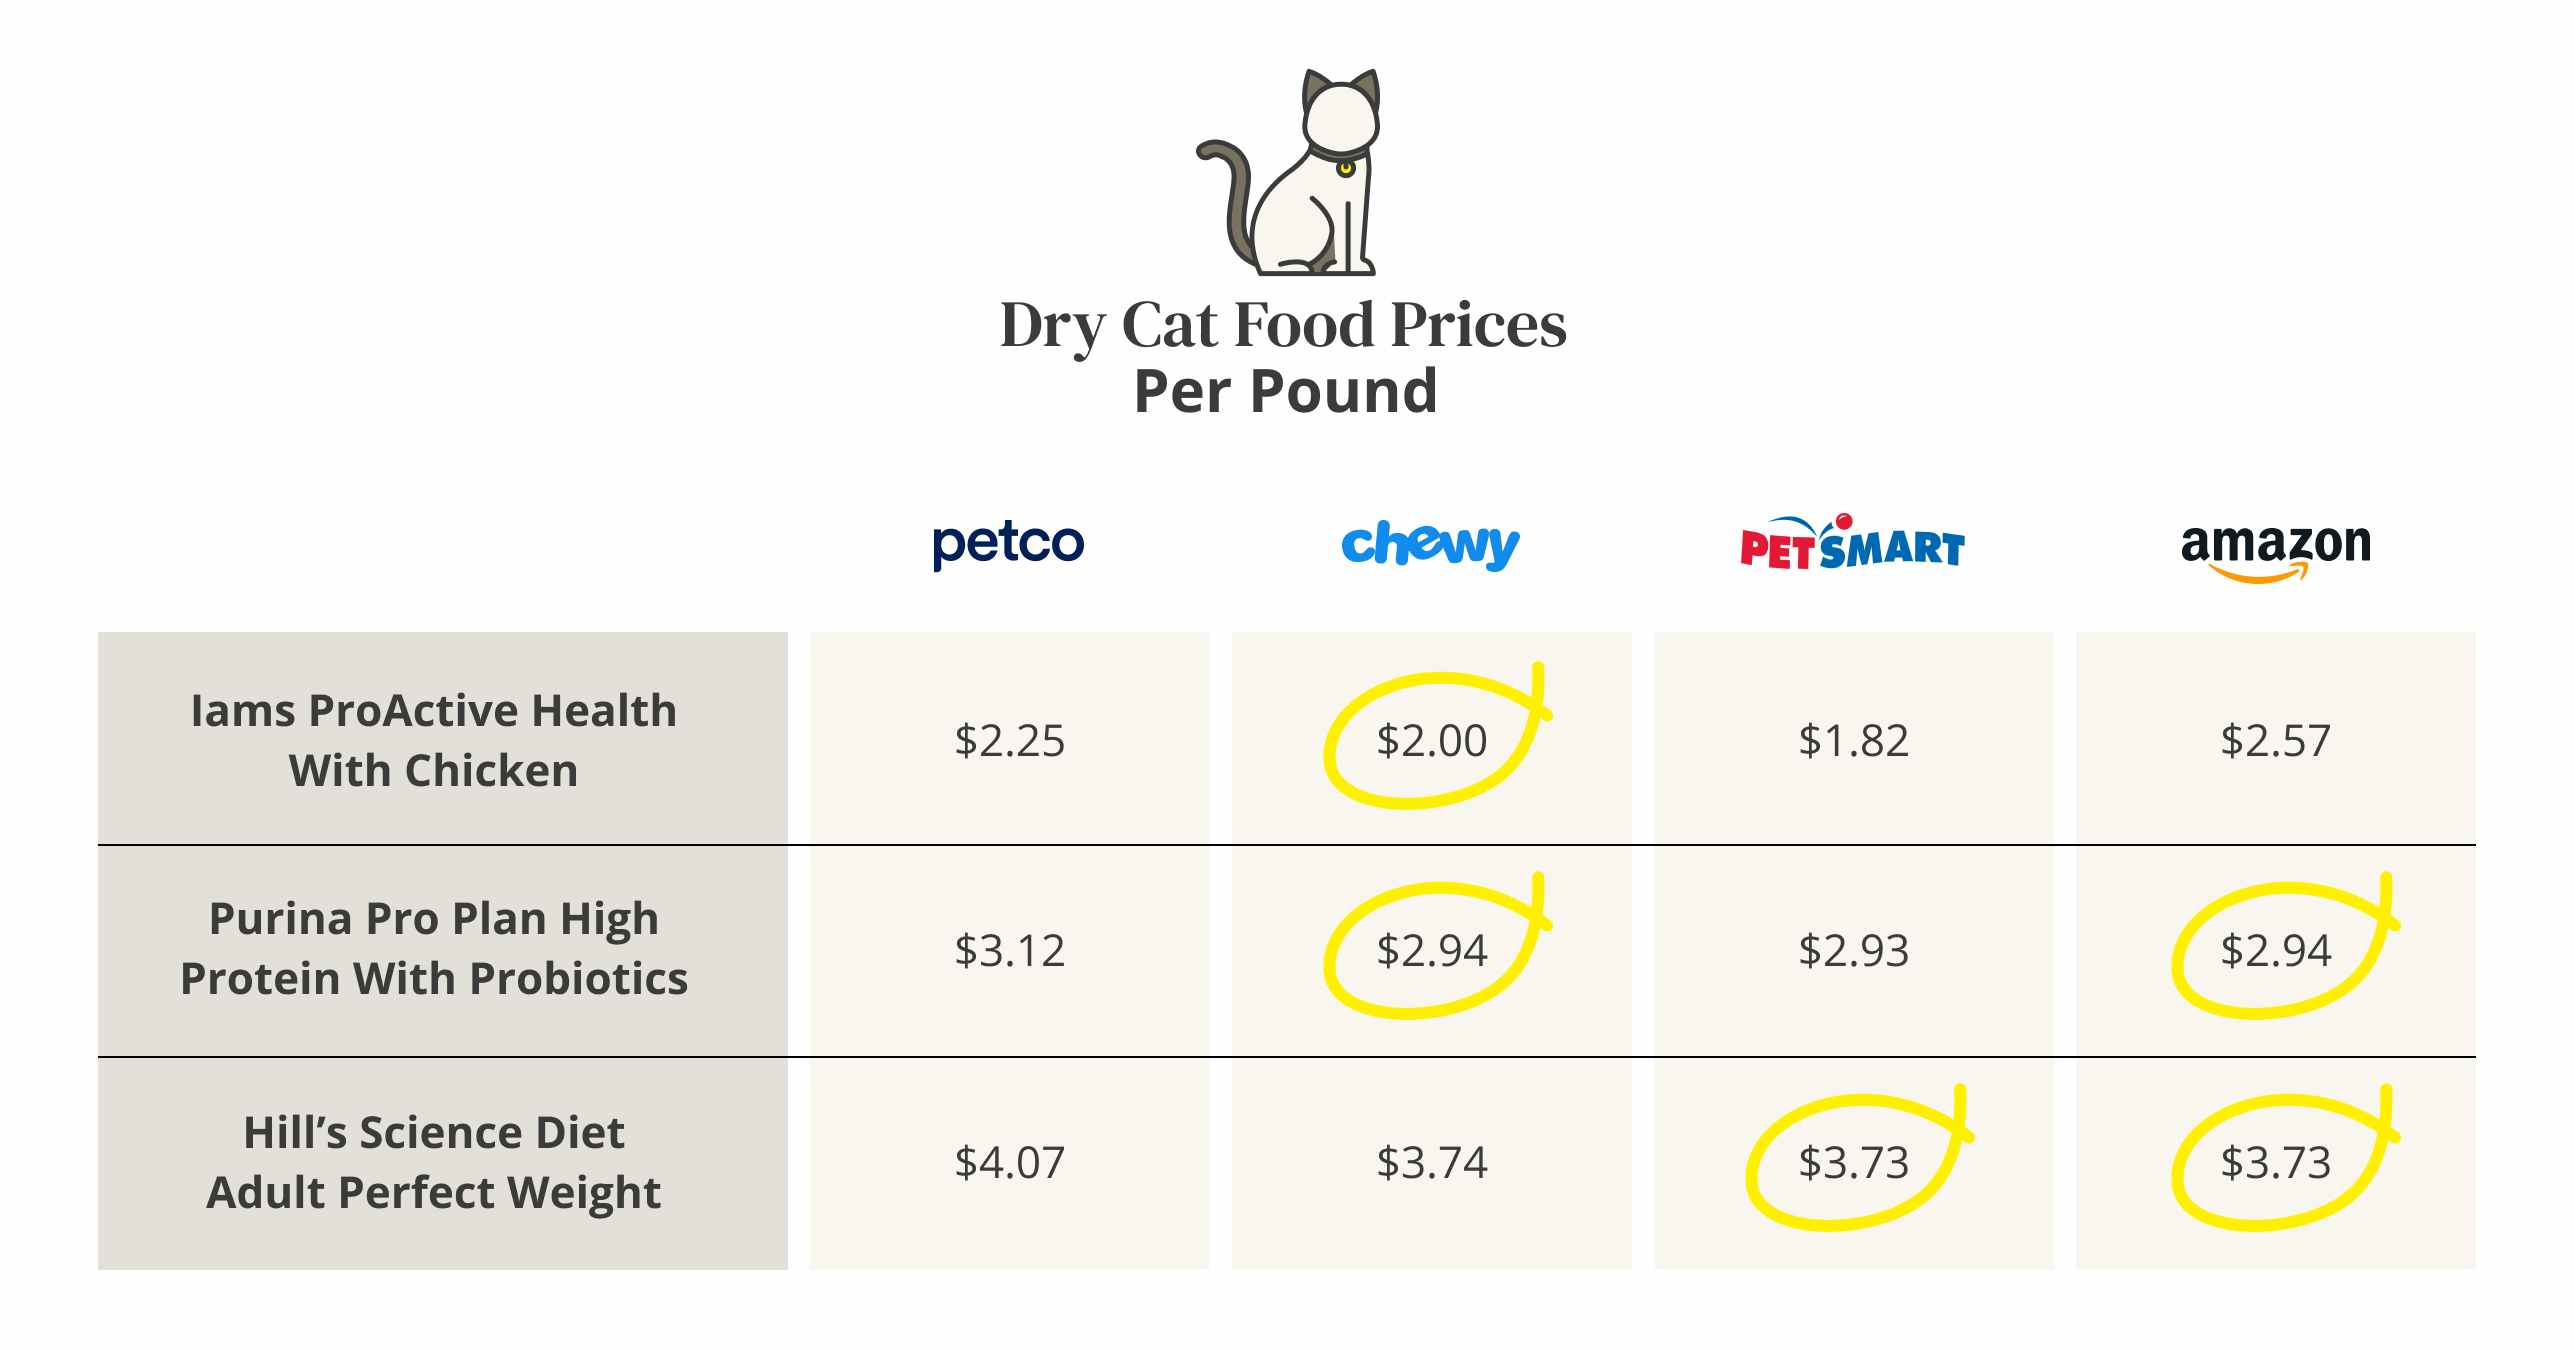 Comparing the costs of dry cat food per ounce at Petco, Chewy, PetSmart, and Amazon.